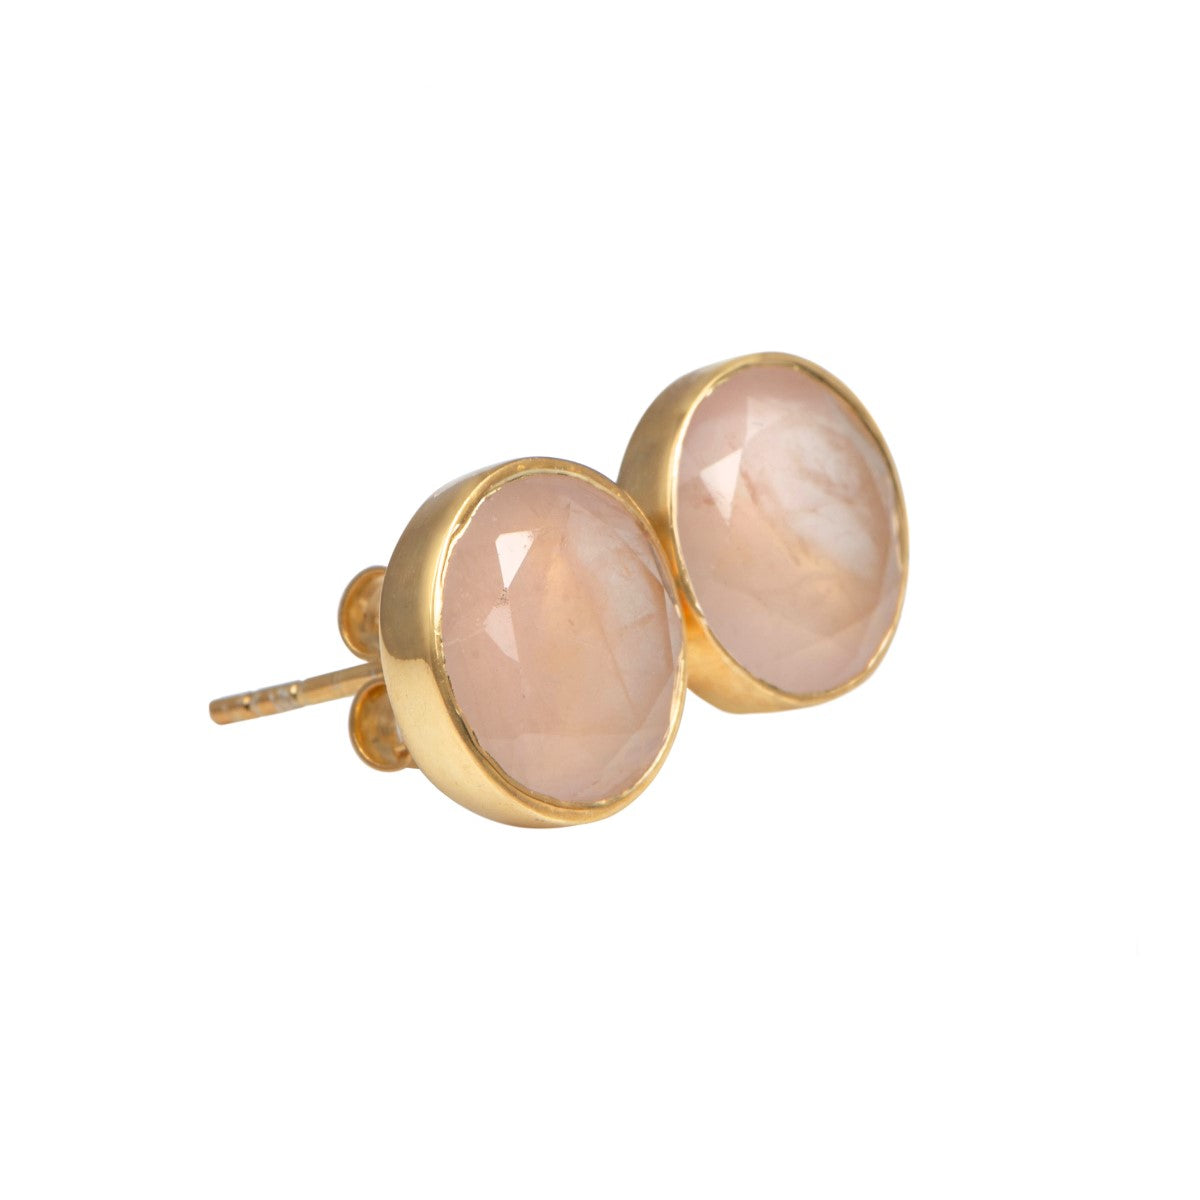 Rose Quartz Studs in Gold Plated Sterling Silver with a Round Faceted Gemstone